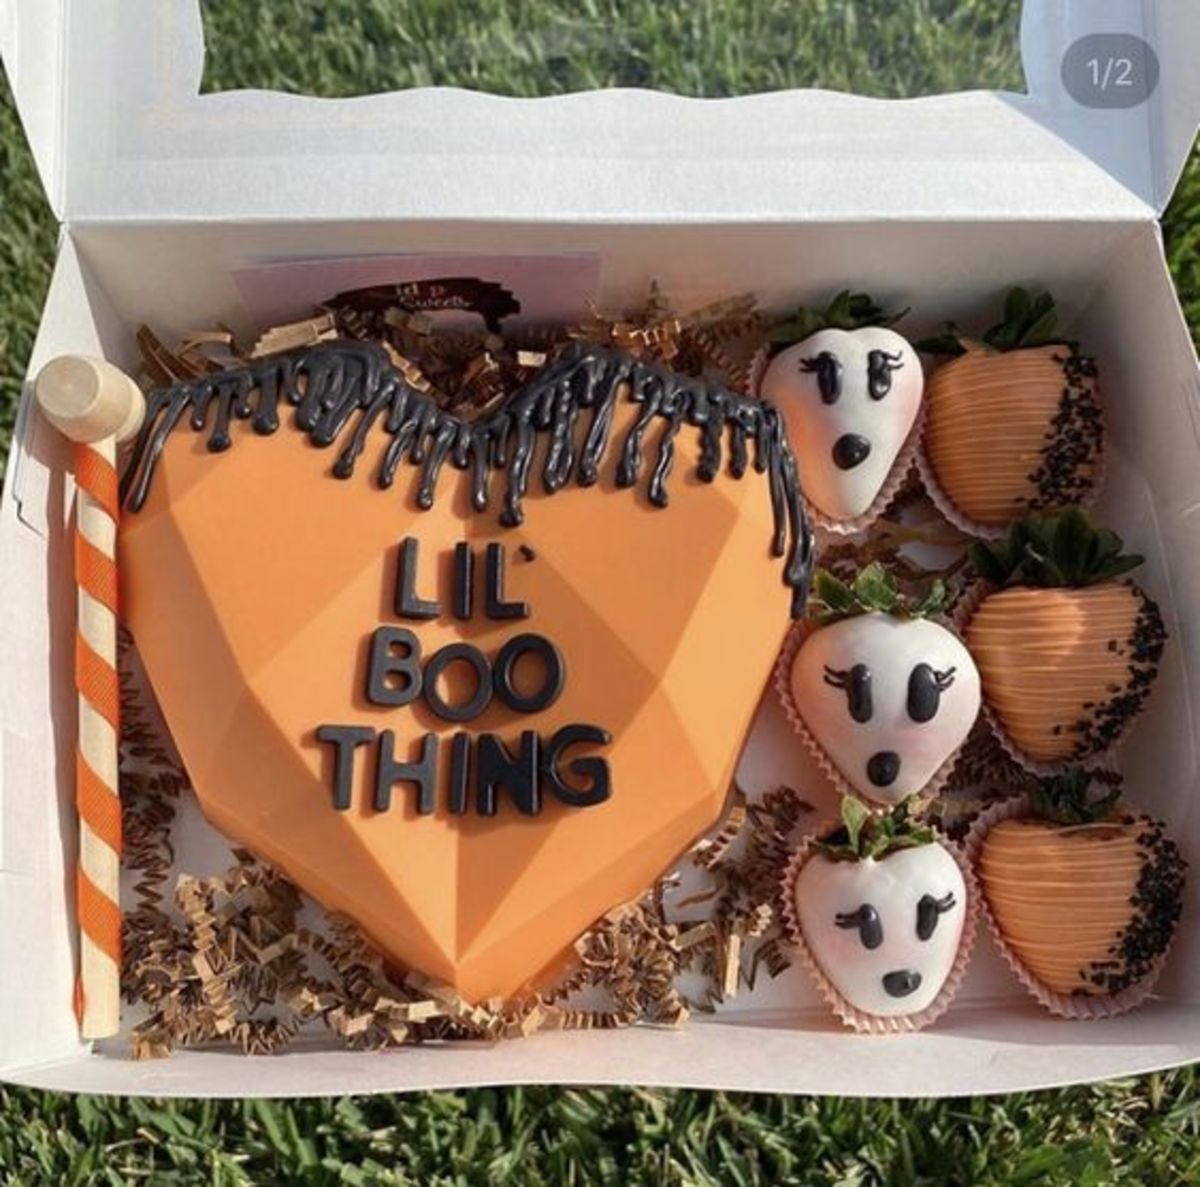 "Lil Boo Thing" Geometric Heart Cake and Dipped Strawberries